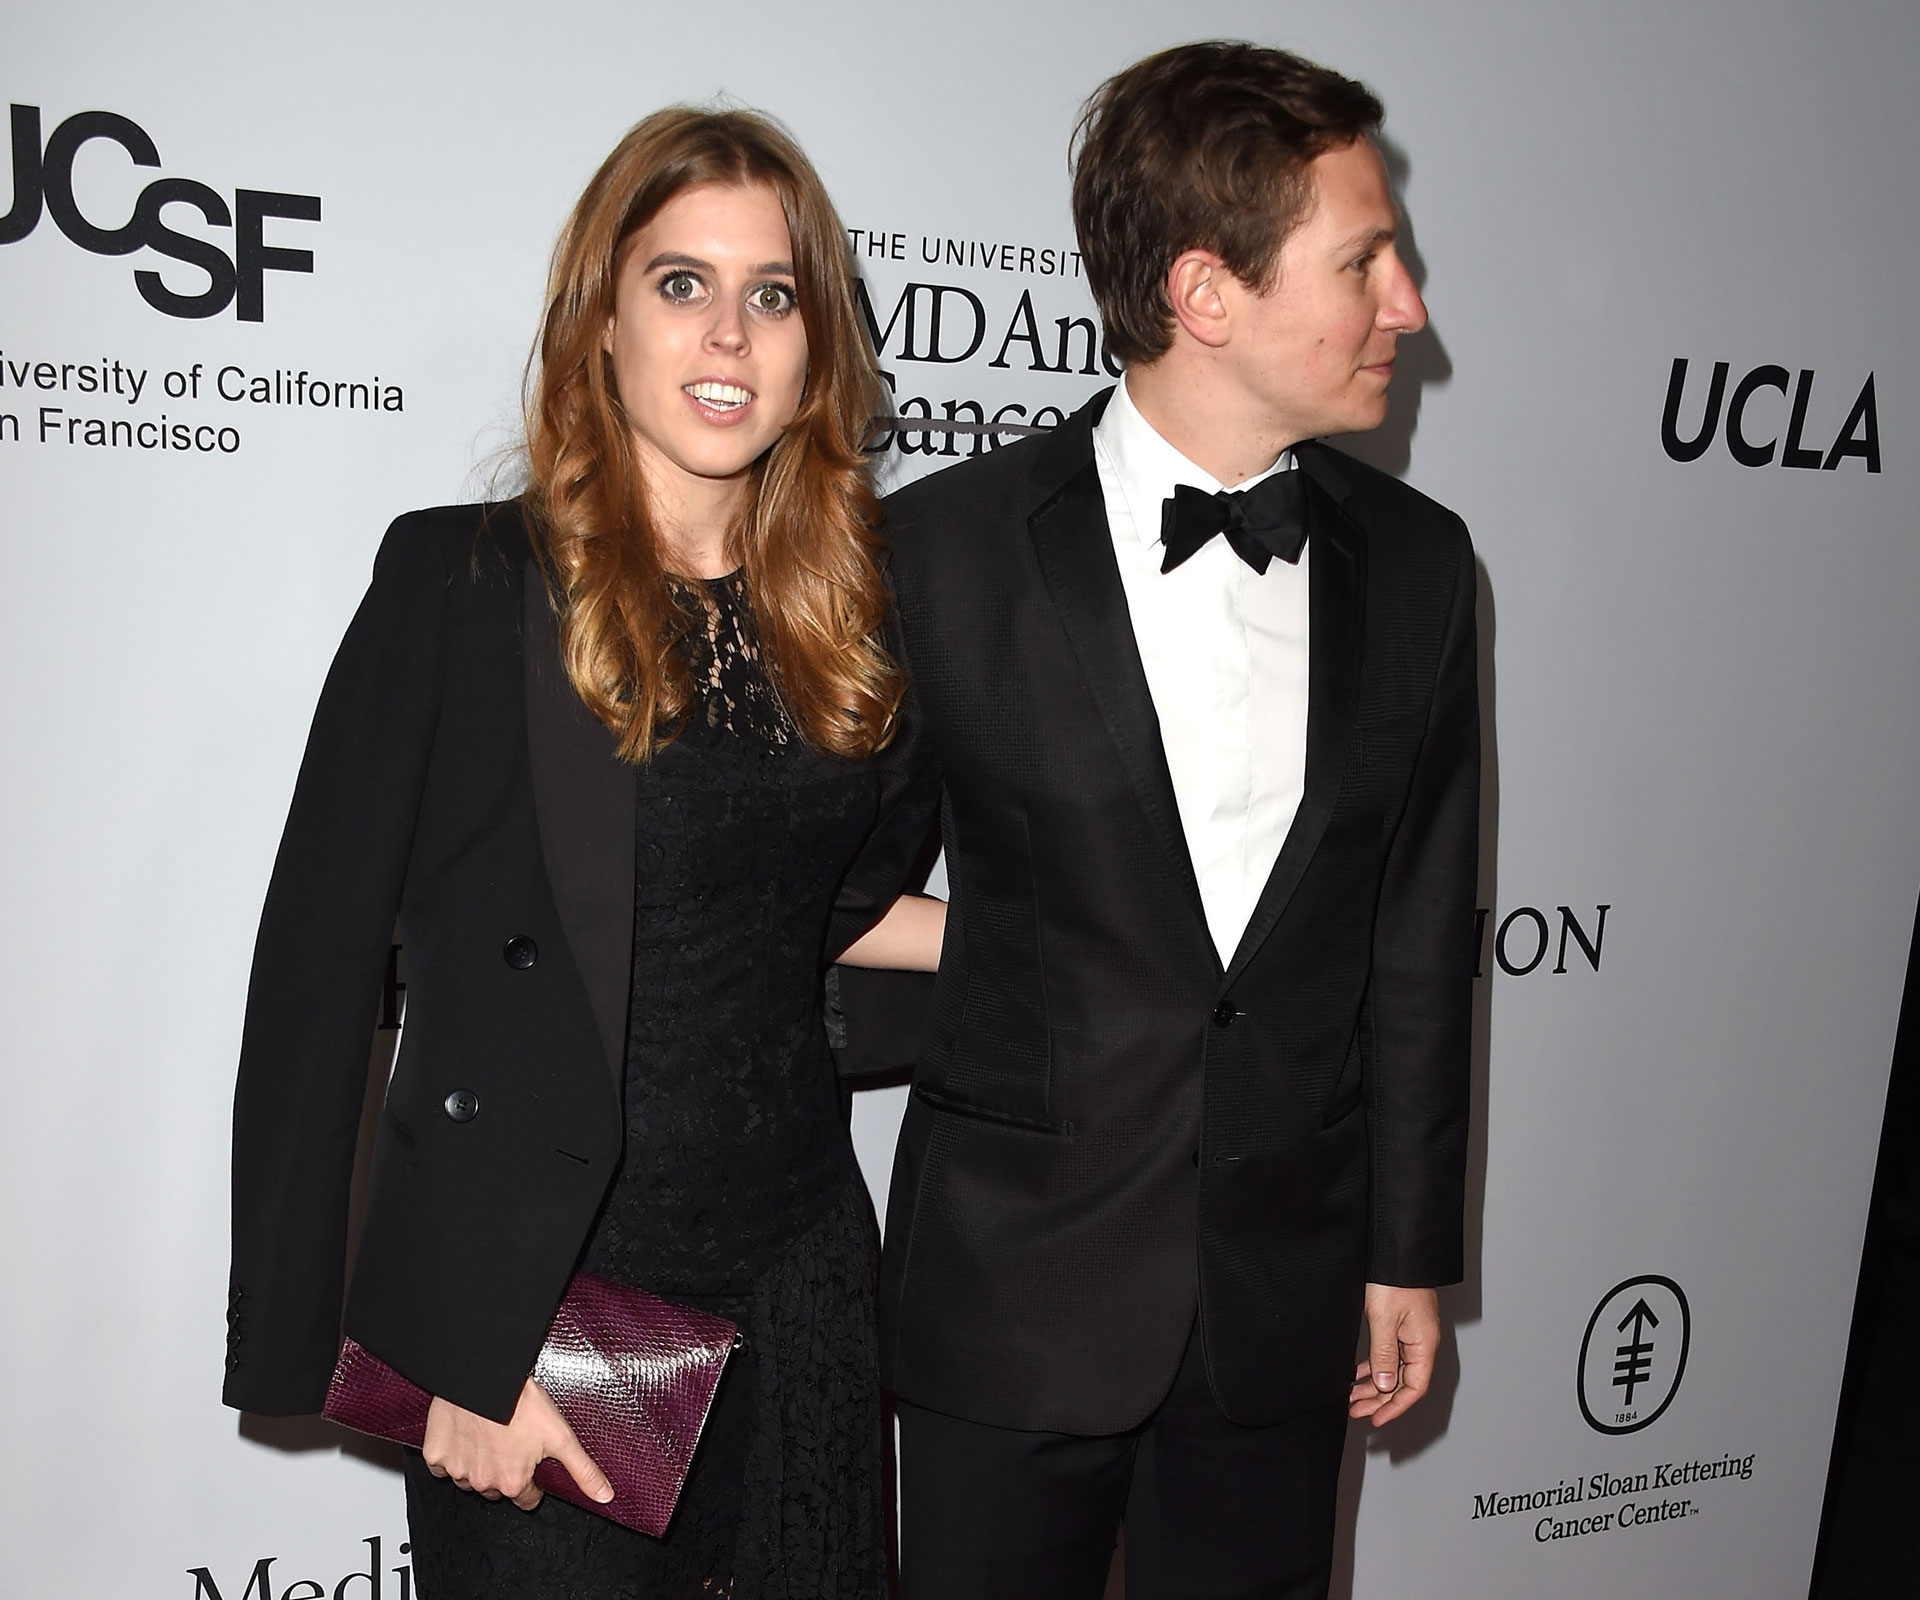 Princess Beatrice splits from Dave Clark after 10 years of dating